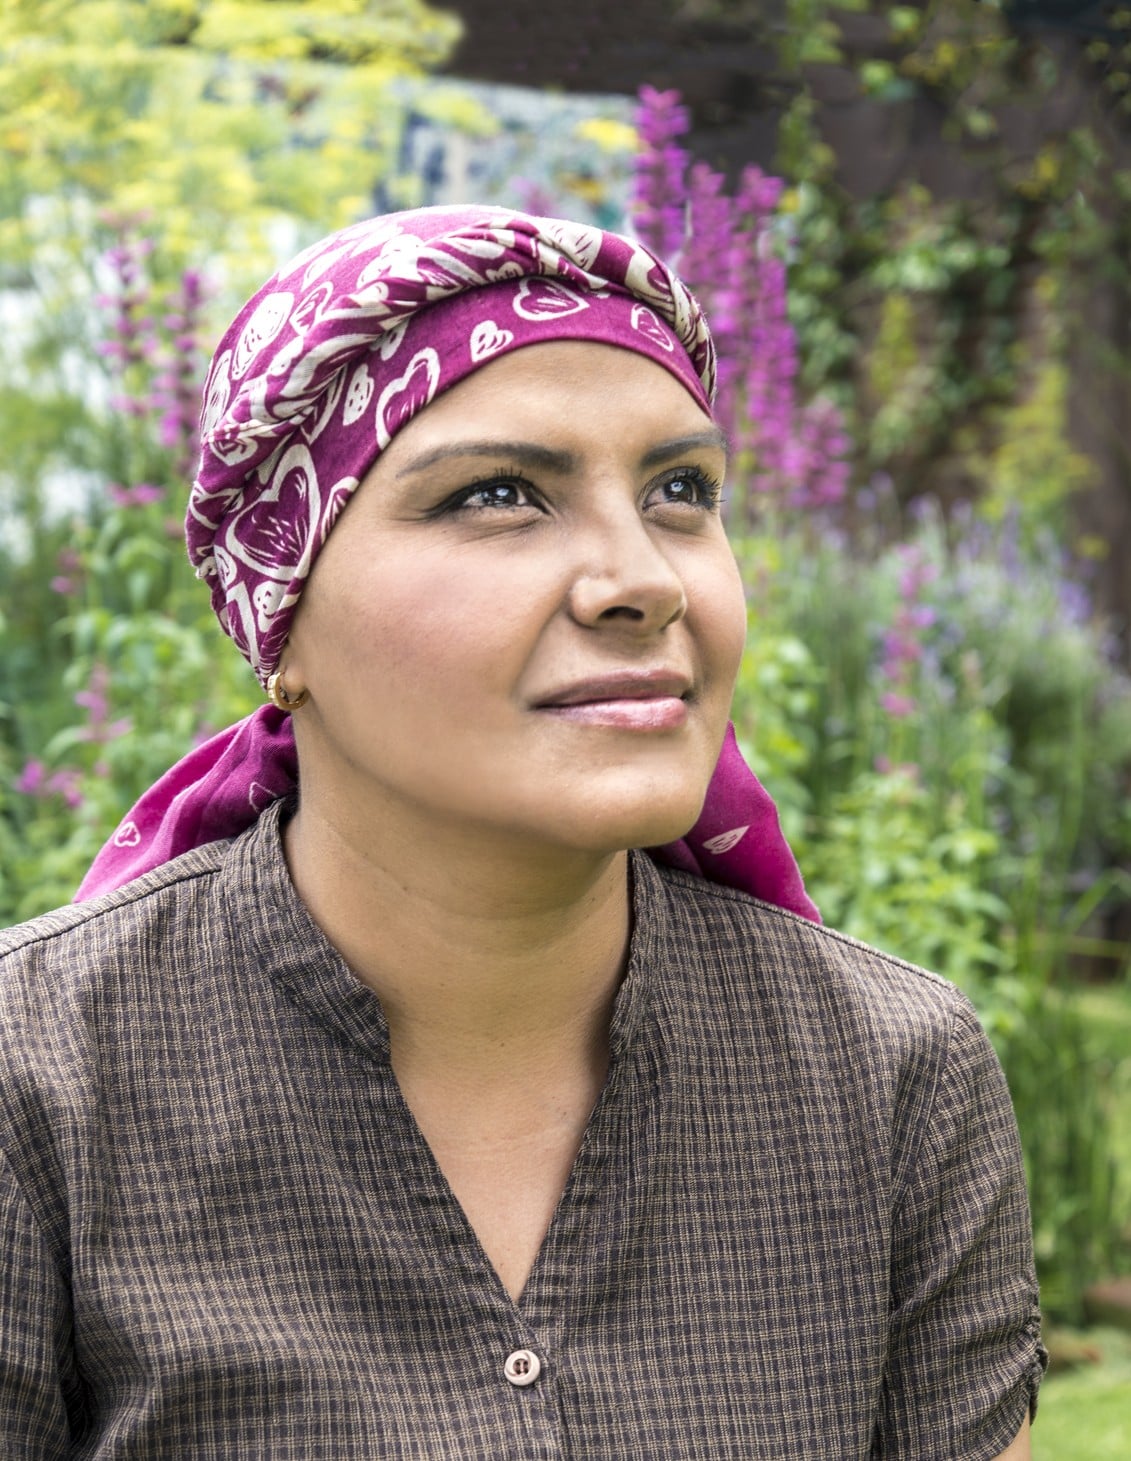 This beautiful woman is under chemotherapy treatment to cure breast cancer